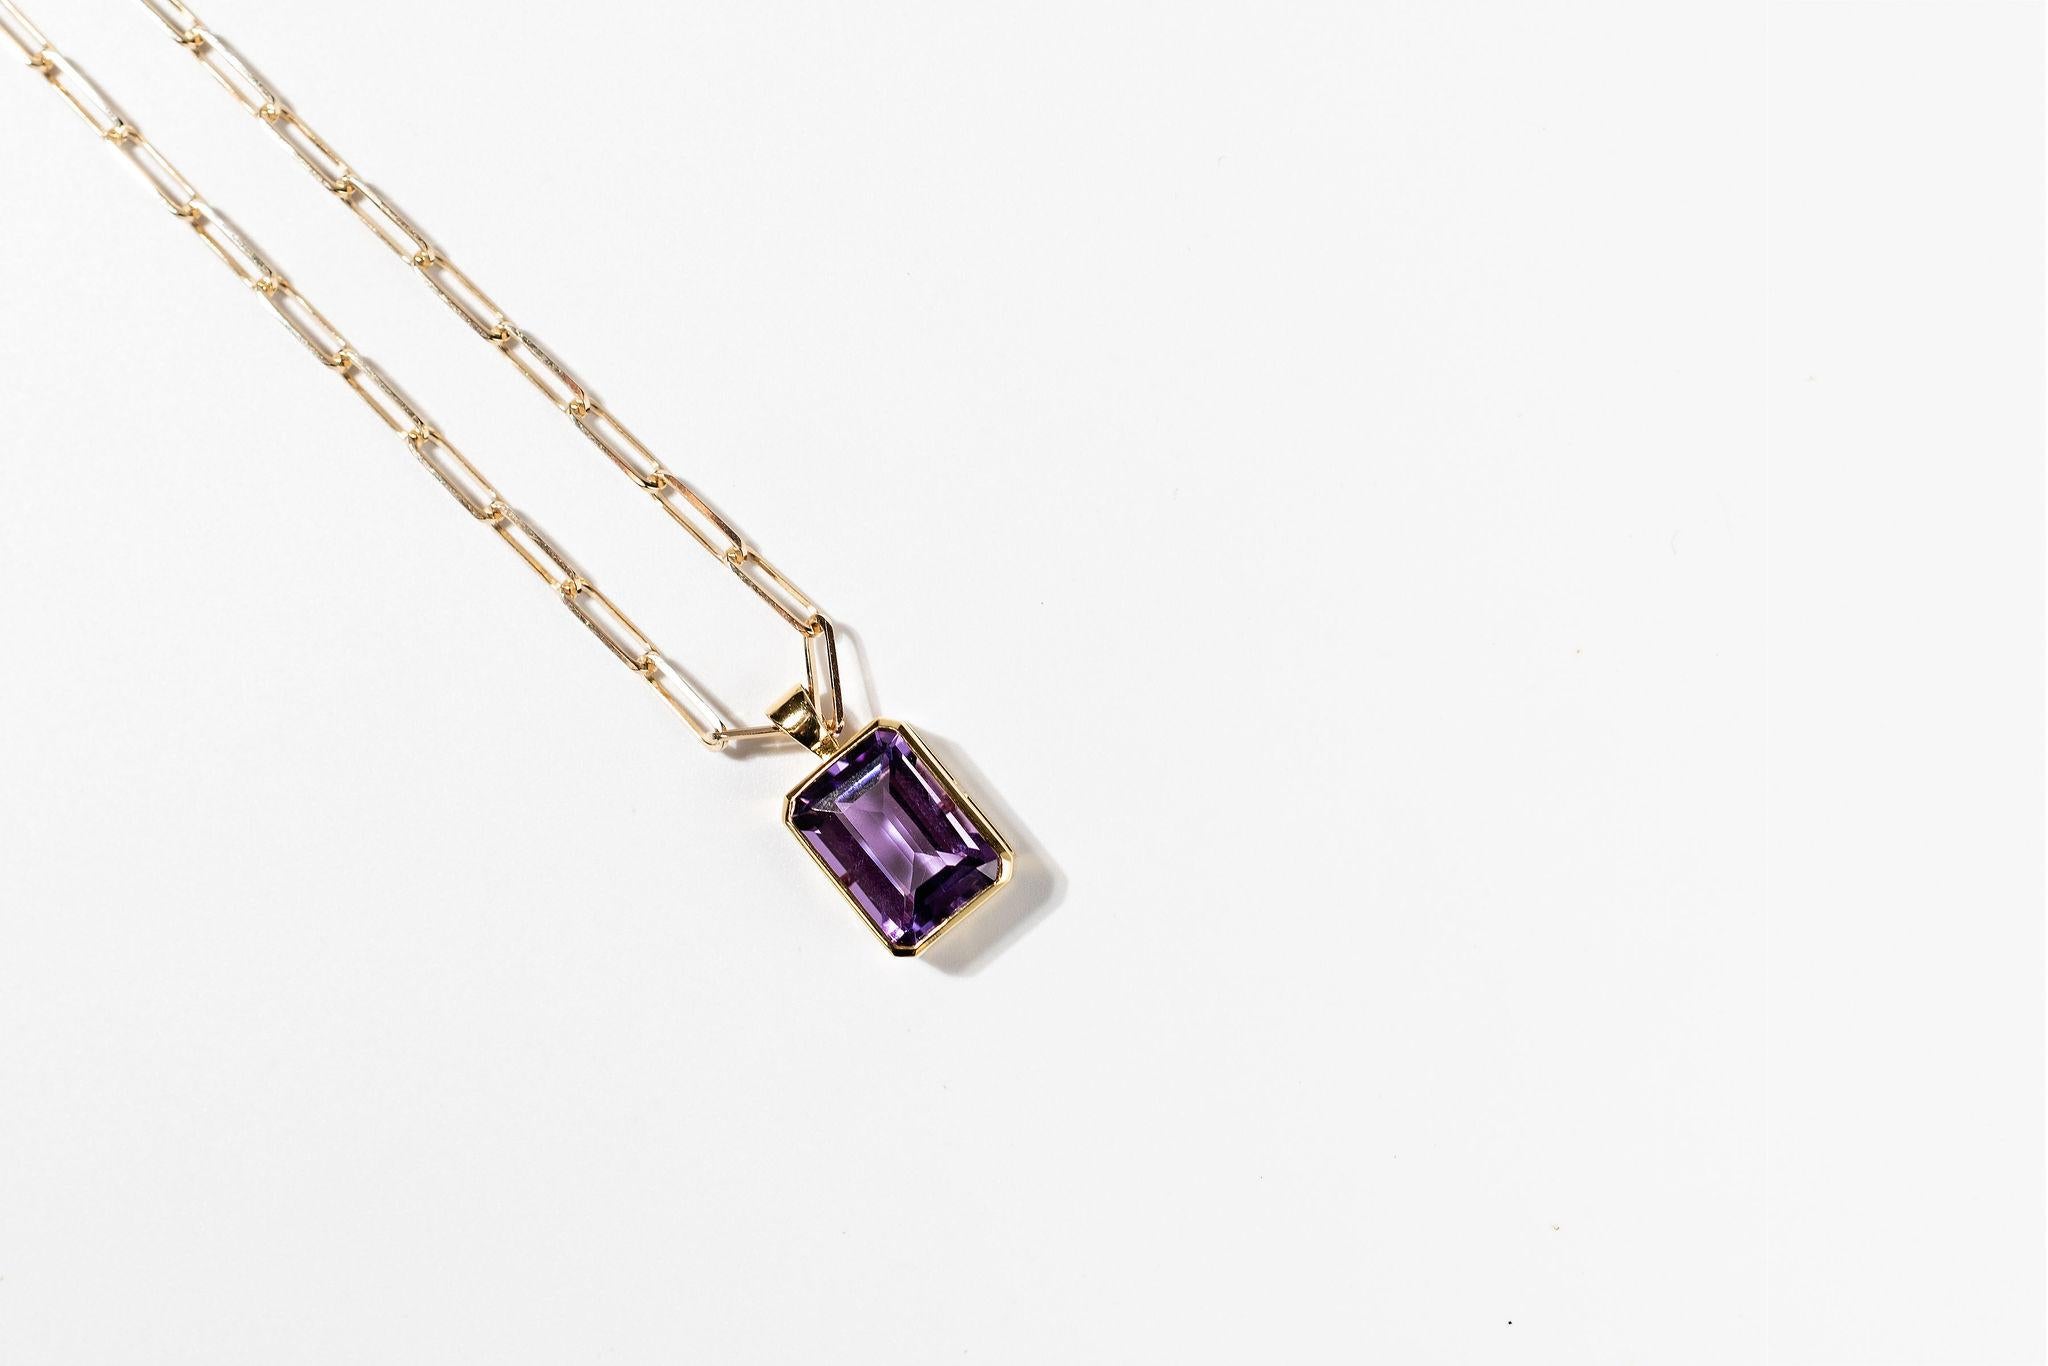  12carat AAA dark purple Amethyst pendant set in 14k yellow gold. It sits on a beautiful 14k gold Paperclip chain. The pendant bale is large enough that the pendant can be removed. It is a contemporary design and is one of three Maadrn made. The